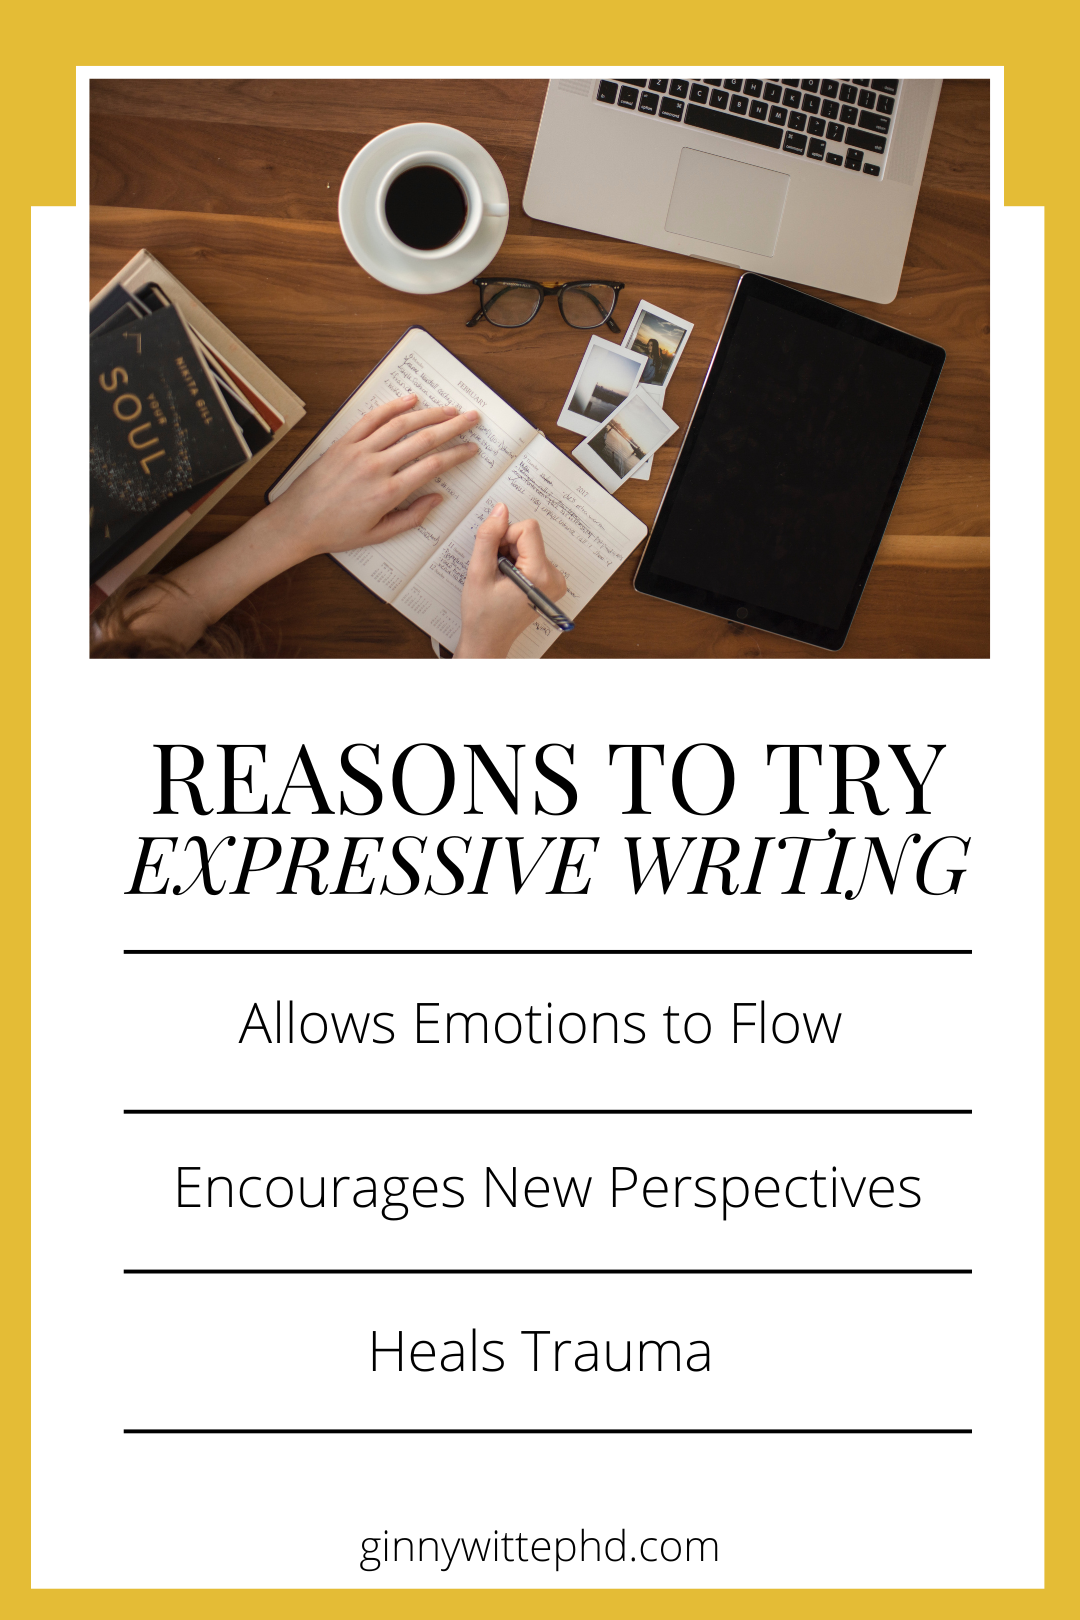 reasons to try expressive writing and how journaling helps